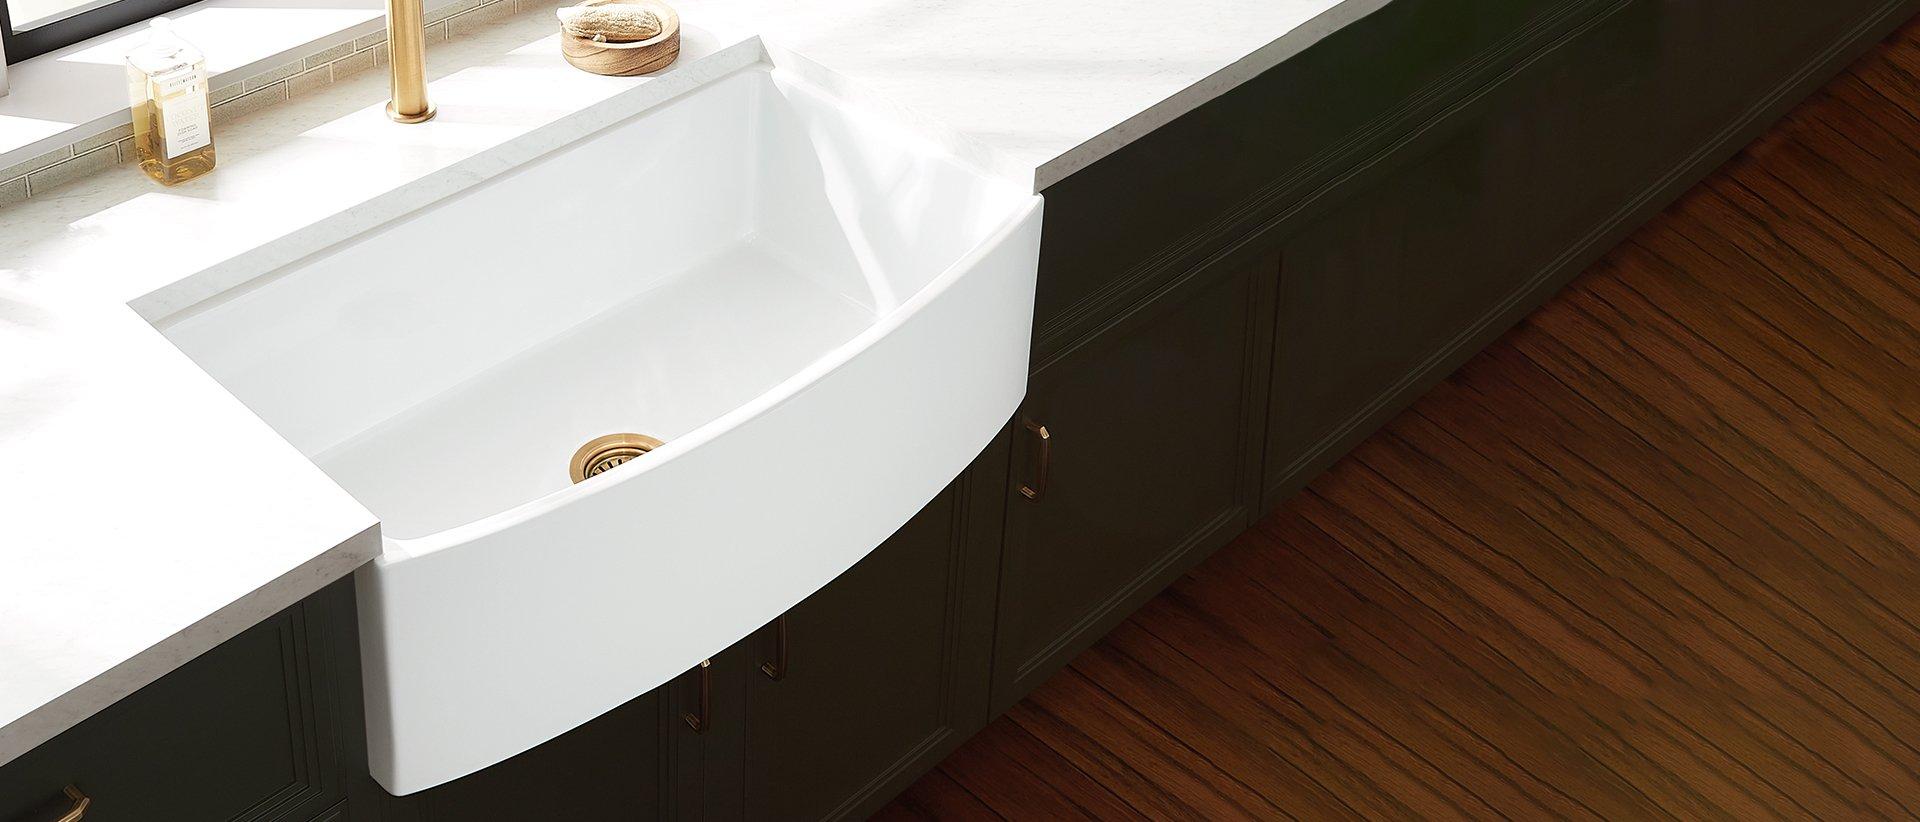 33" Wenbrook Fireclay Farmhouse Kitchen Sink with Curved Apron